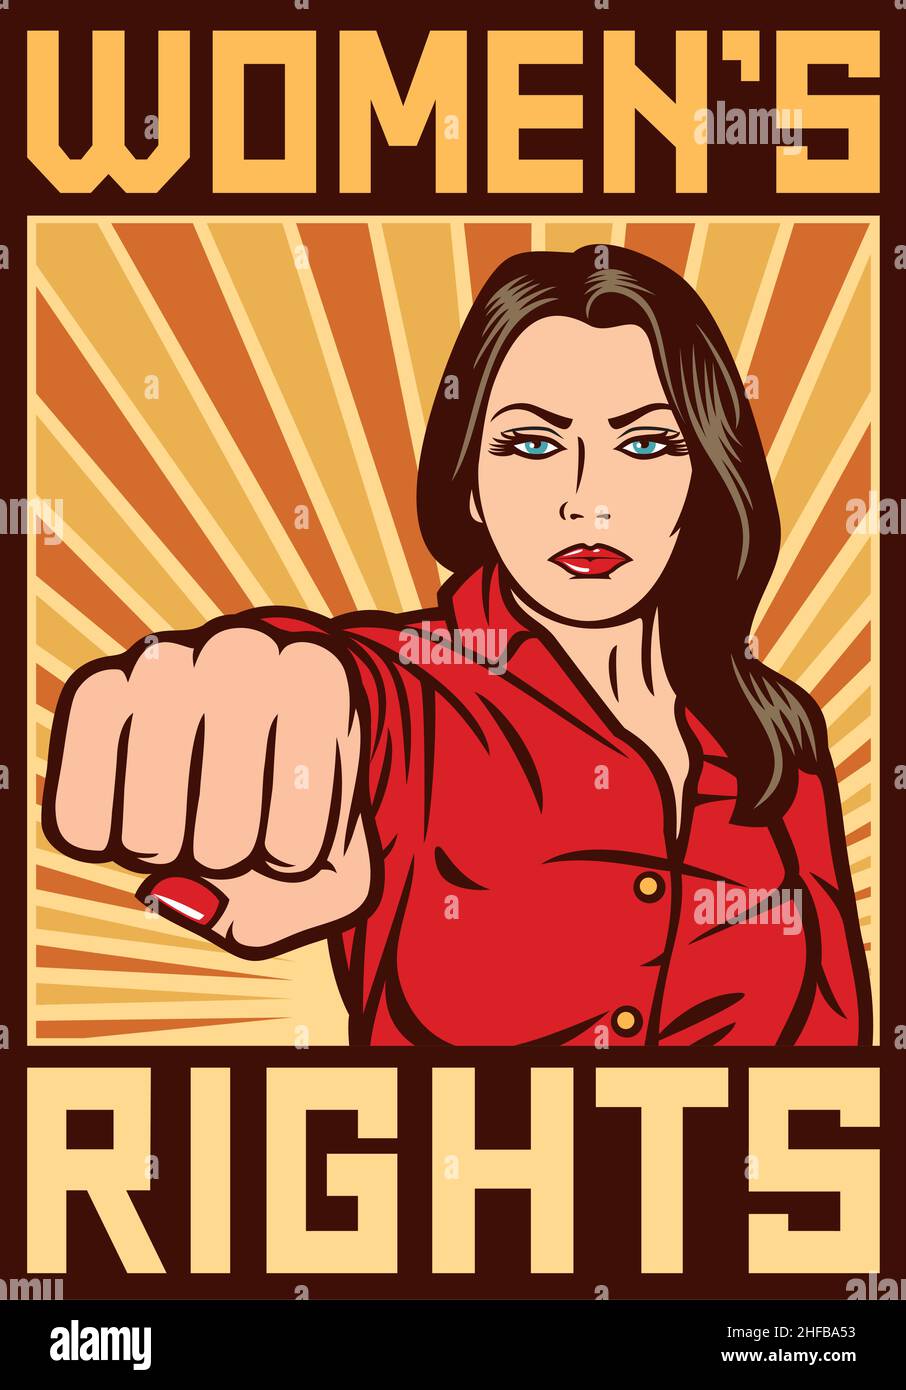 Women`s rights poster - pop art woman punching vector illustration Stock Vector